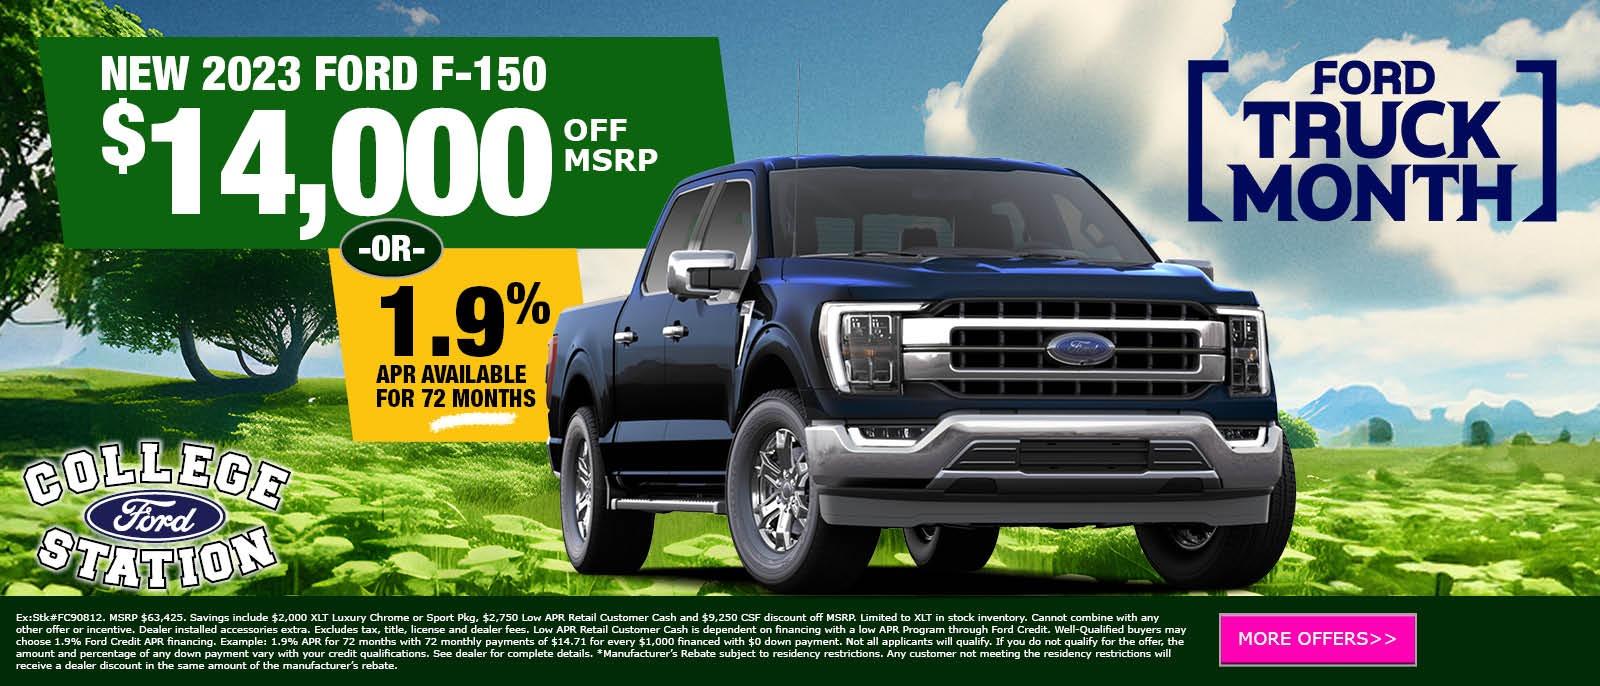 NEW 2023 FORD F-150 $15,500 OFF MSRP -OR-
1.9% APR AVAILABLE FOR 72 MONTHS